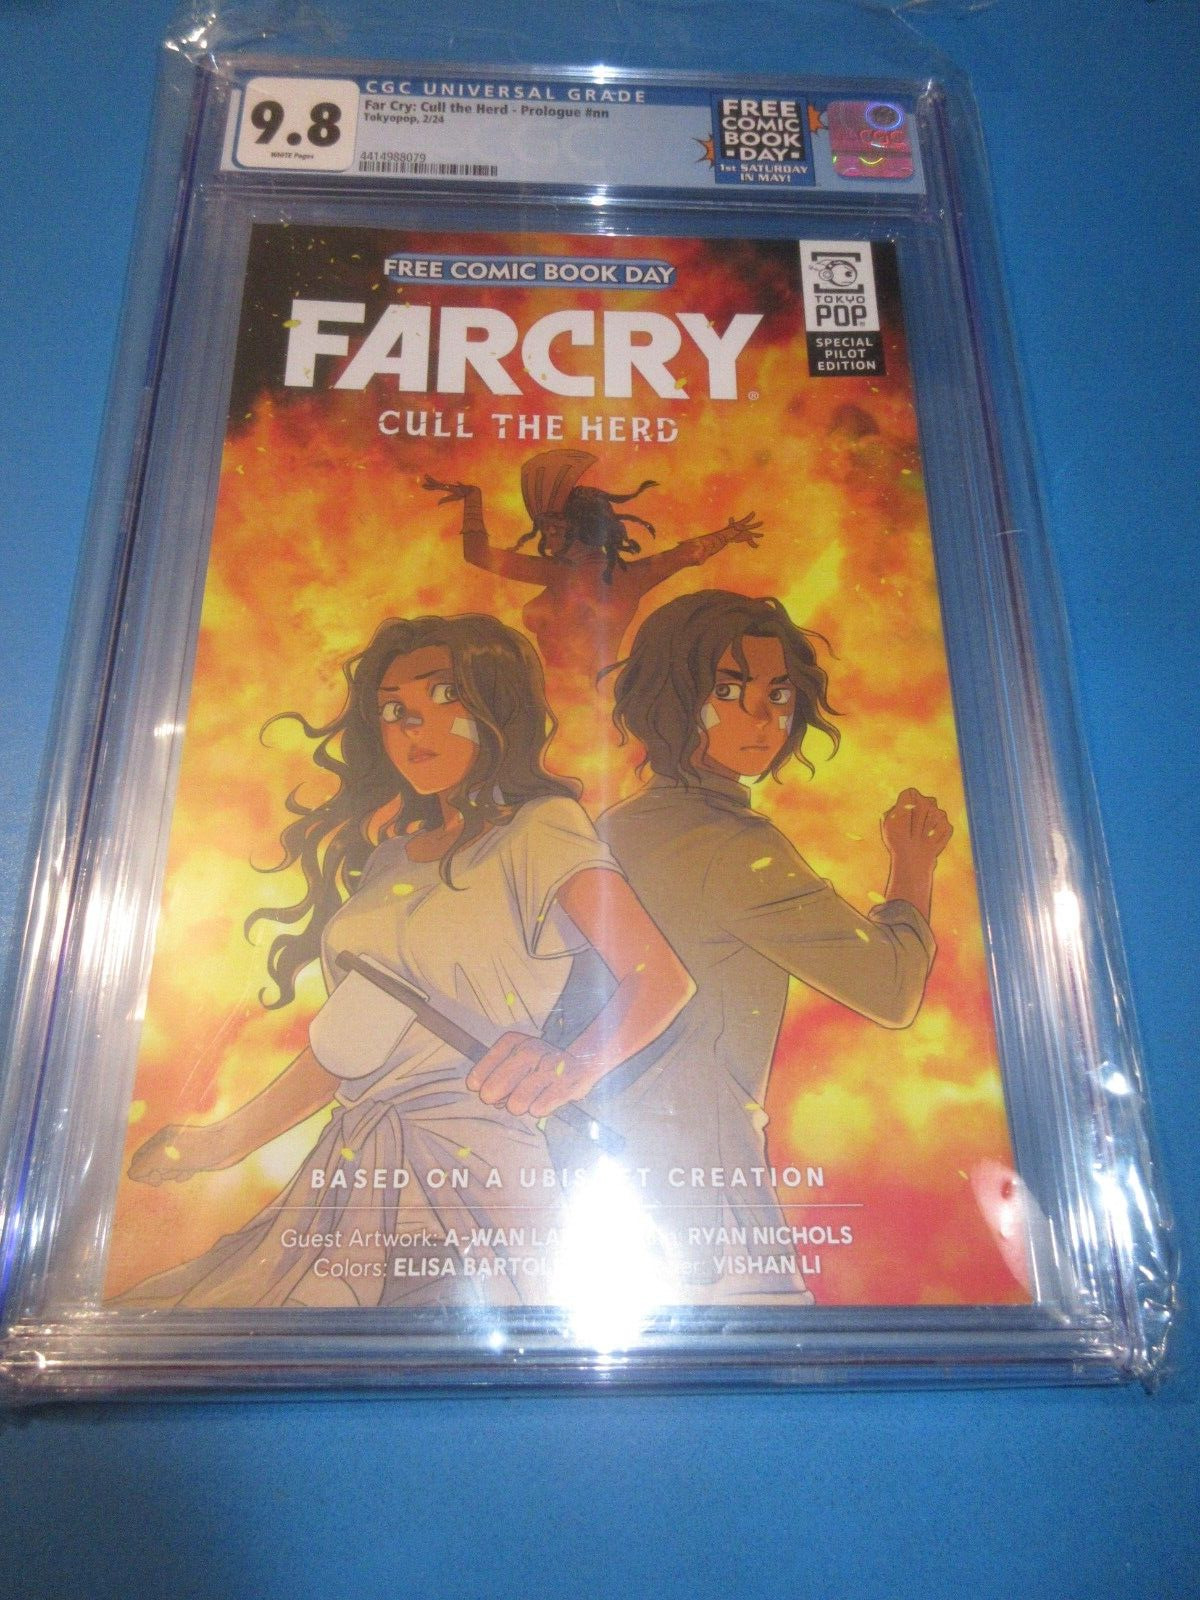 Farcry Cull the Herd #1 FCBC CGC 9.8 NM/M Gorgeous gem wow